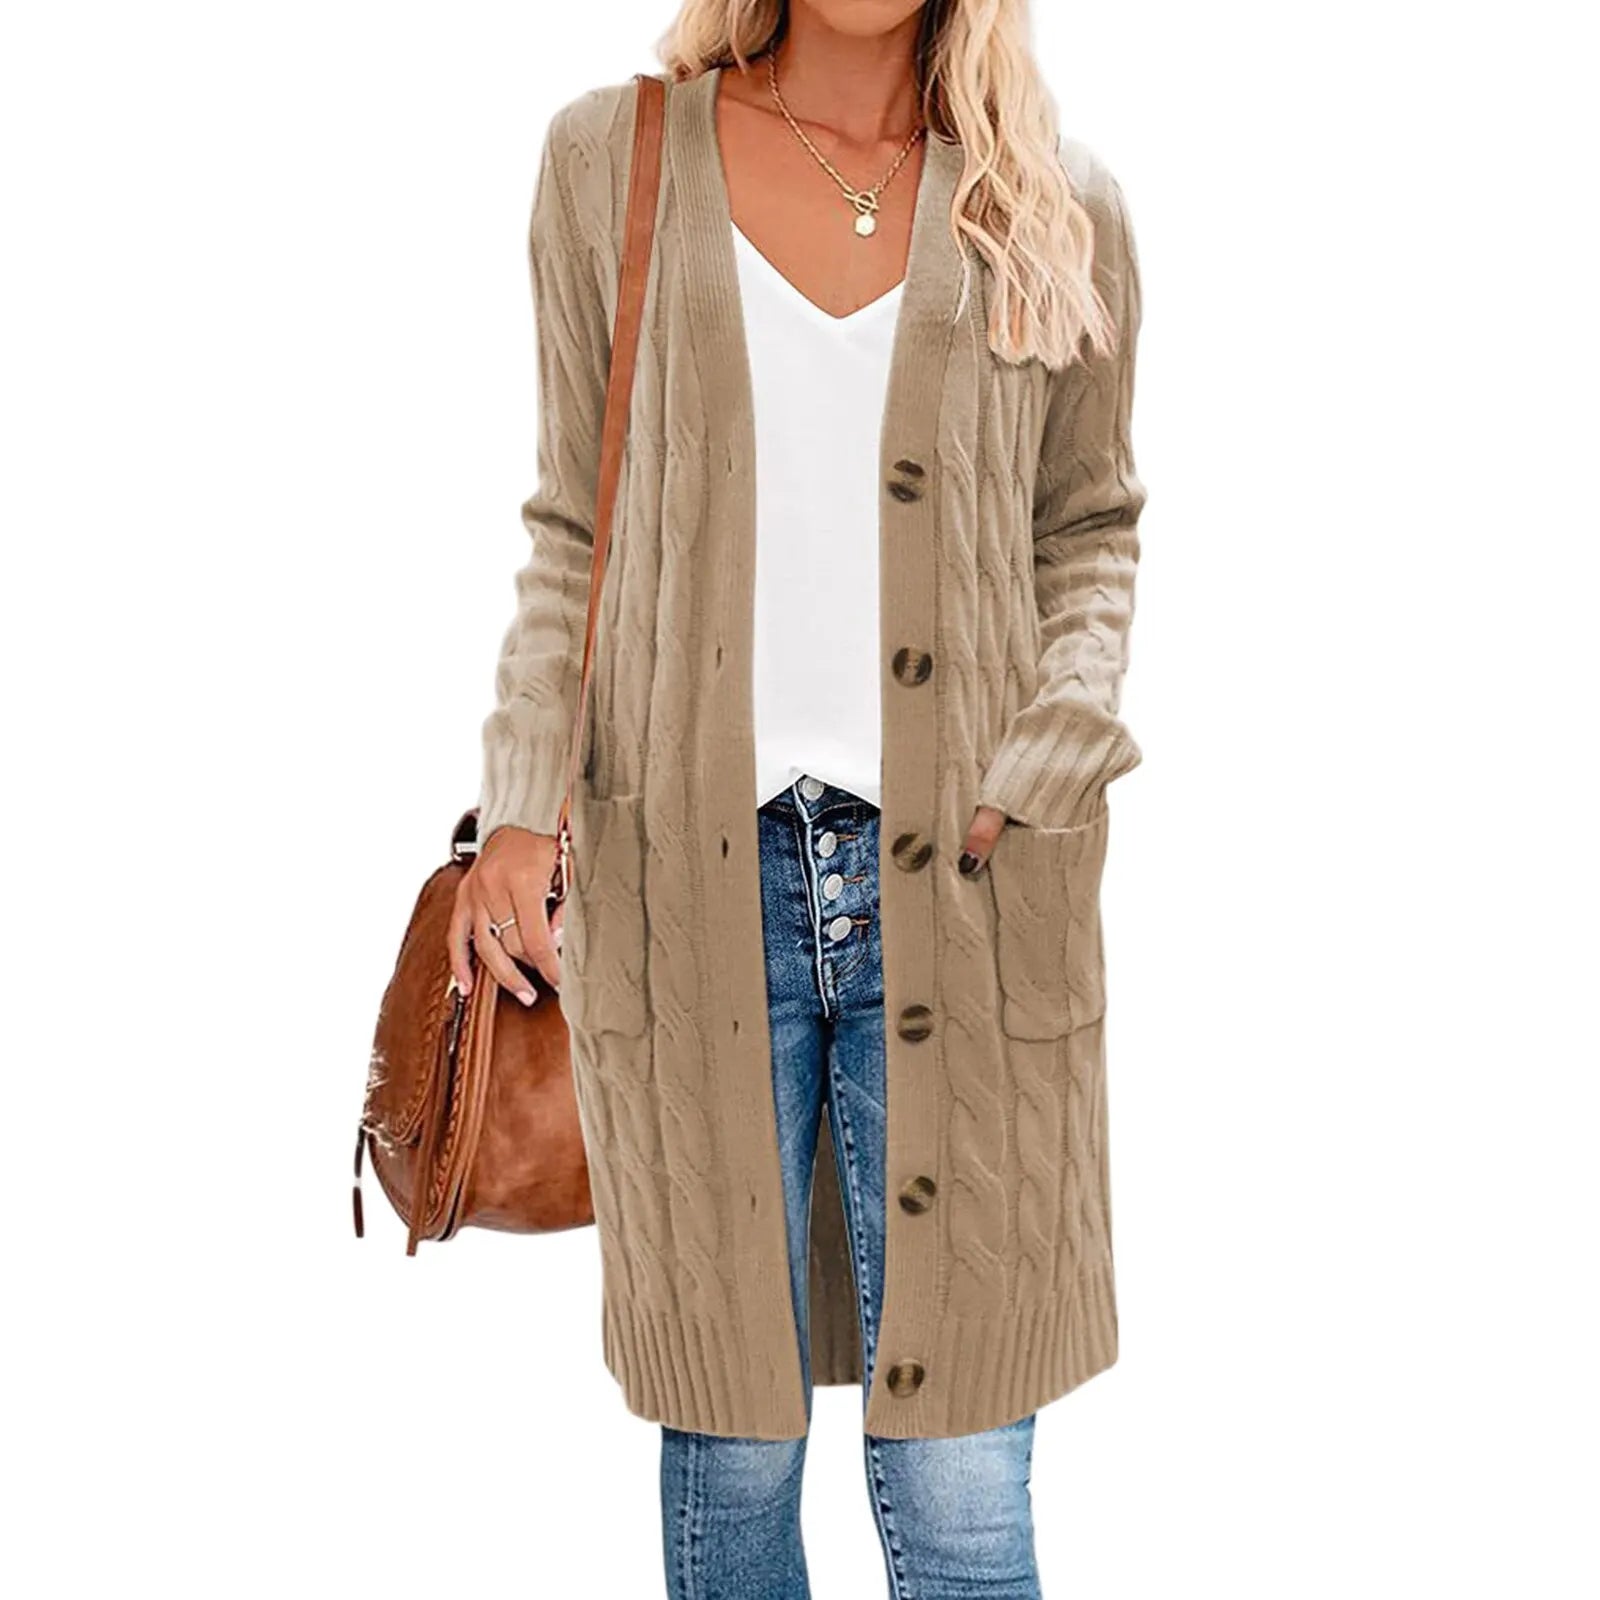 Female Cardigan Solid Color Long Sleeve Sweater Knitted Coat with Pockets for Spring Fall S M L